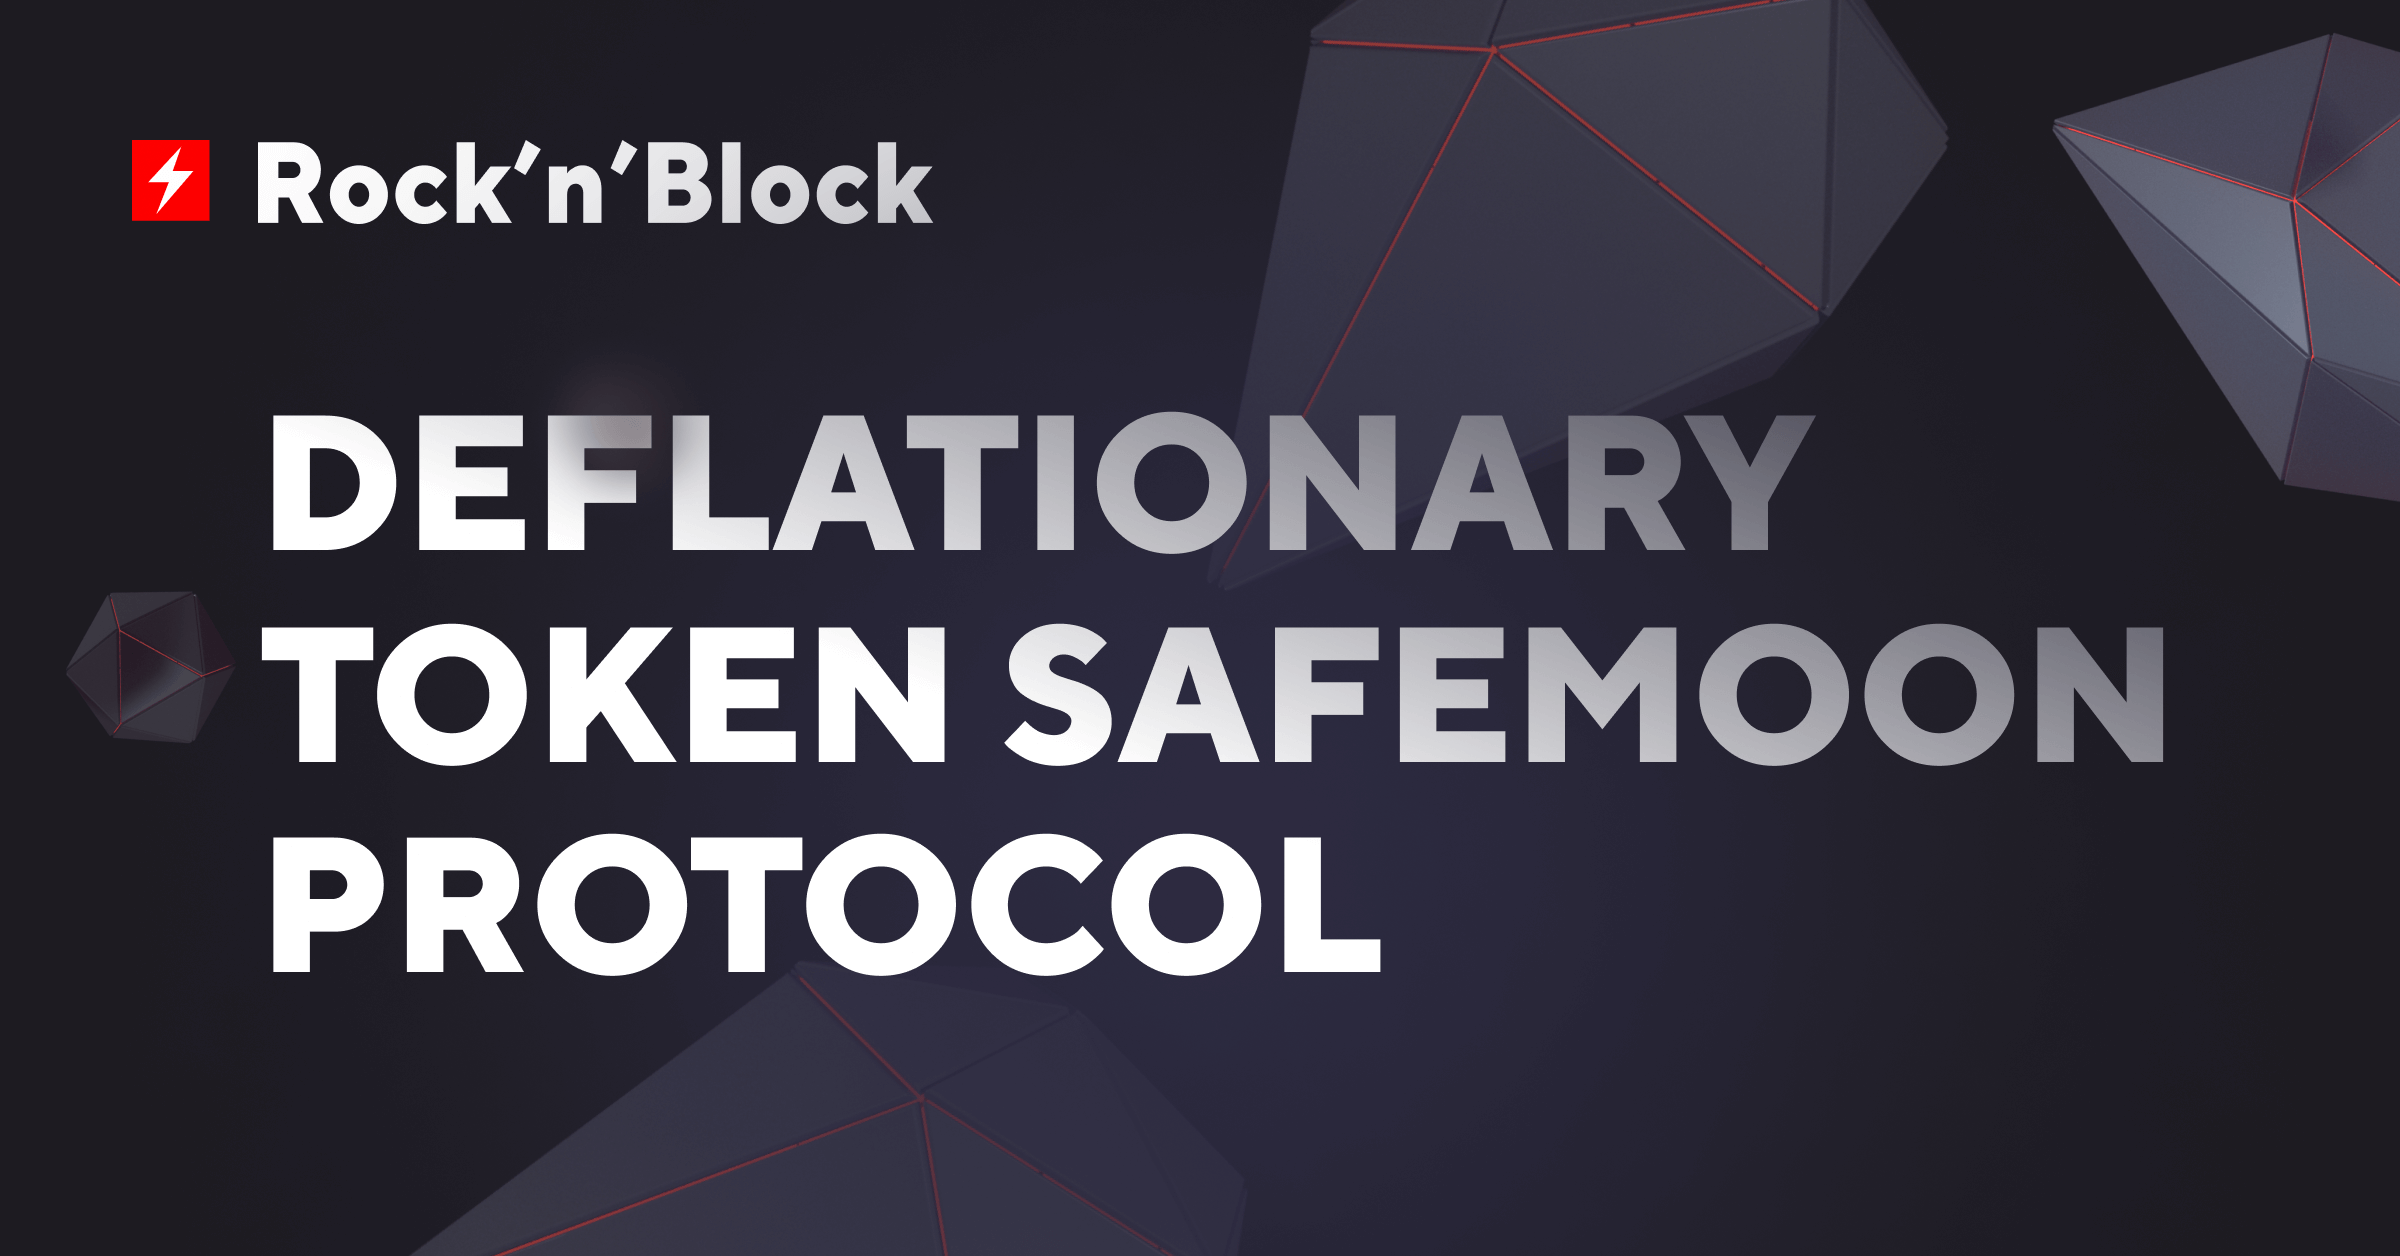 What is all about safemoon token and safemoon protocol? Why does everybody wants to have a token like that? Rock'n'Block explains the mechanics of safemoon